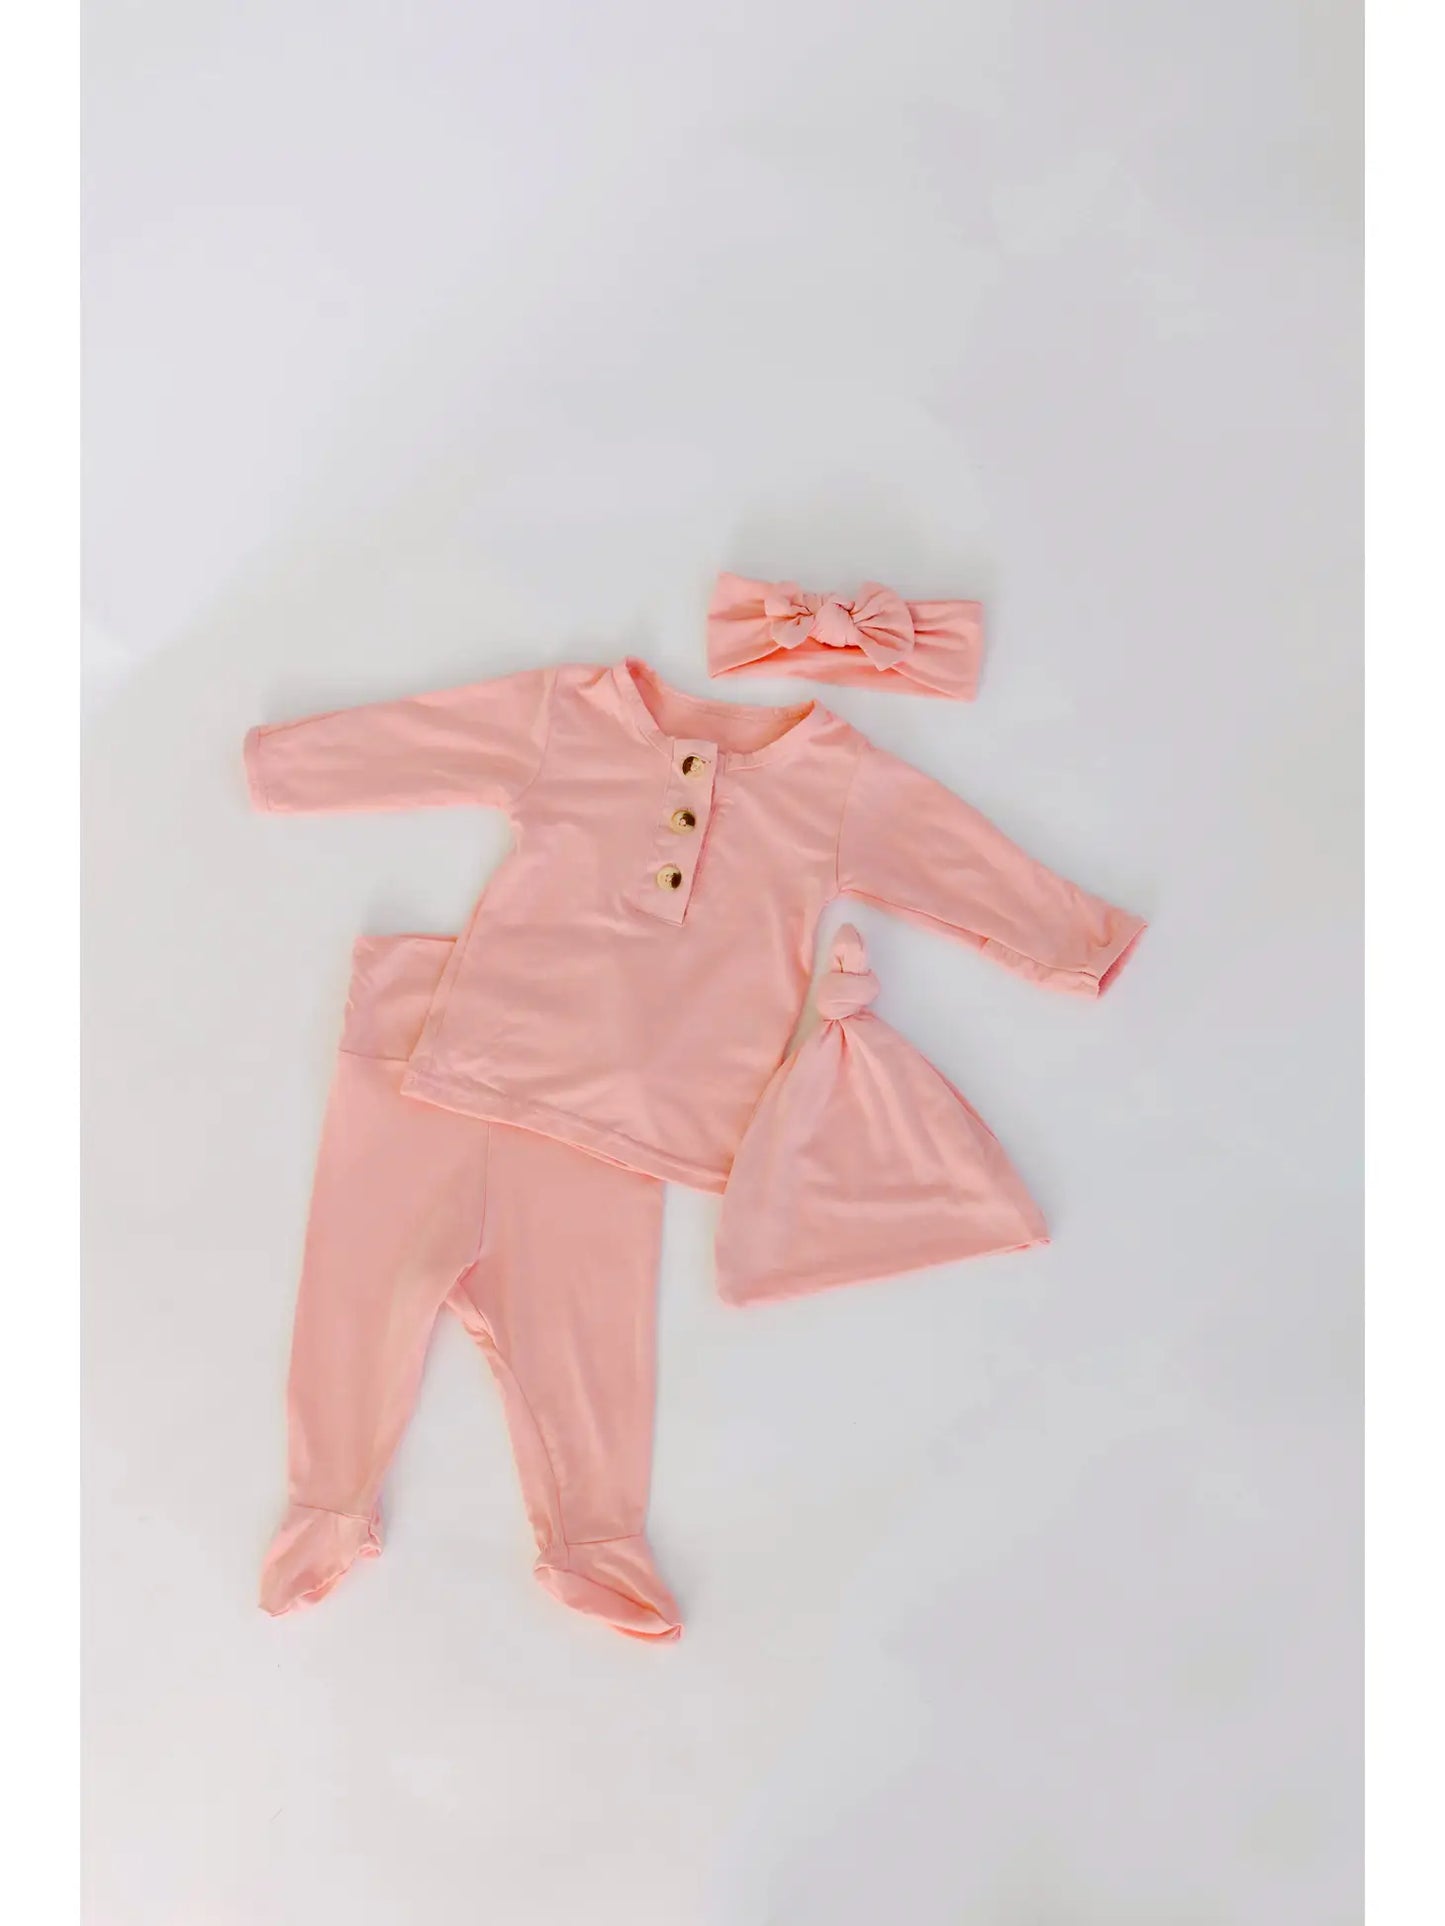 Pink Outfit and Hat/Headband Set (Newborn-3 months)